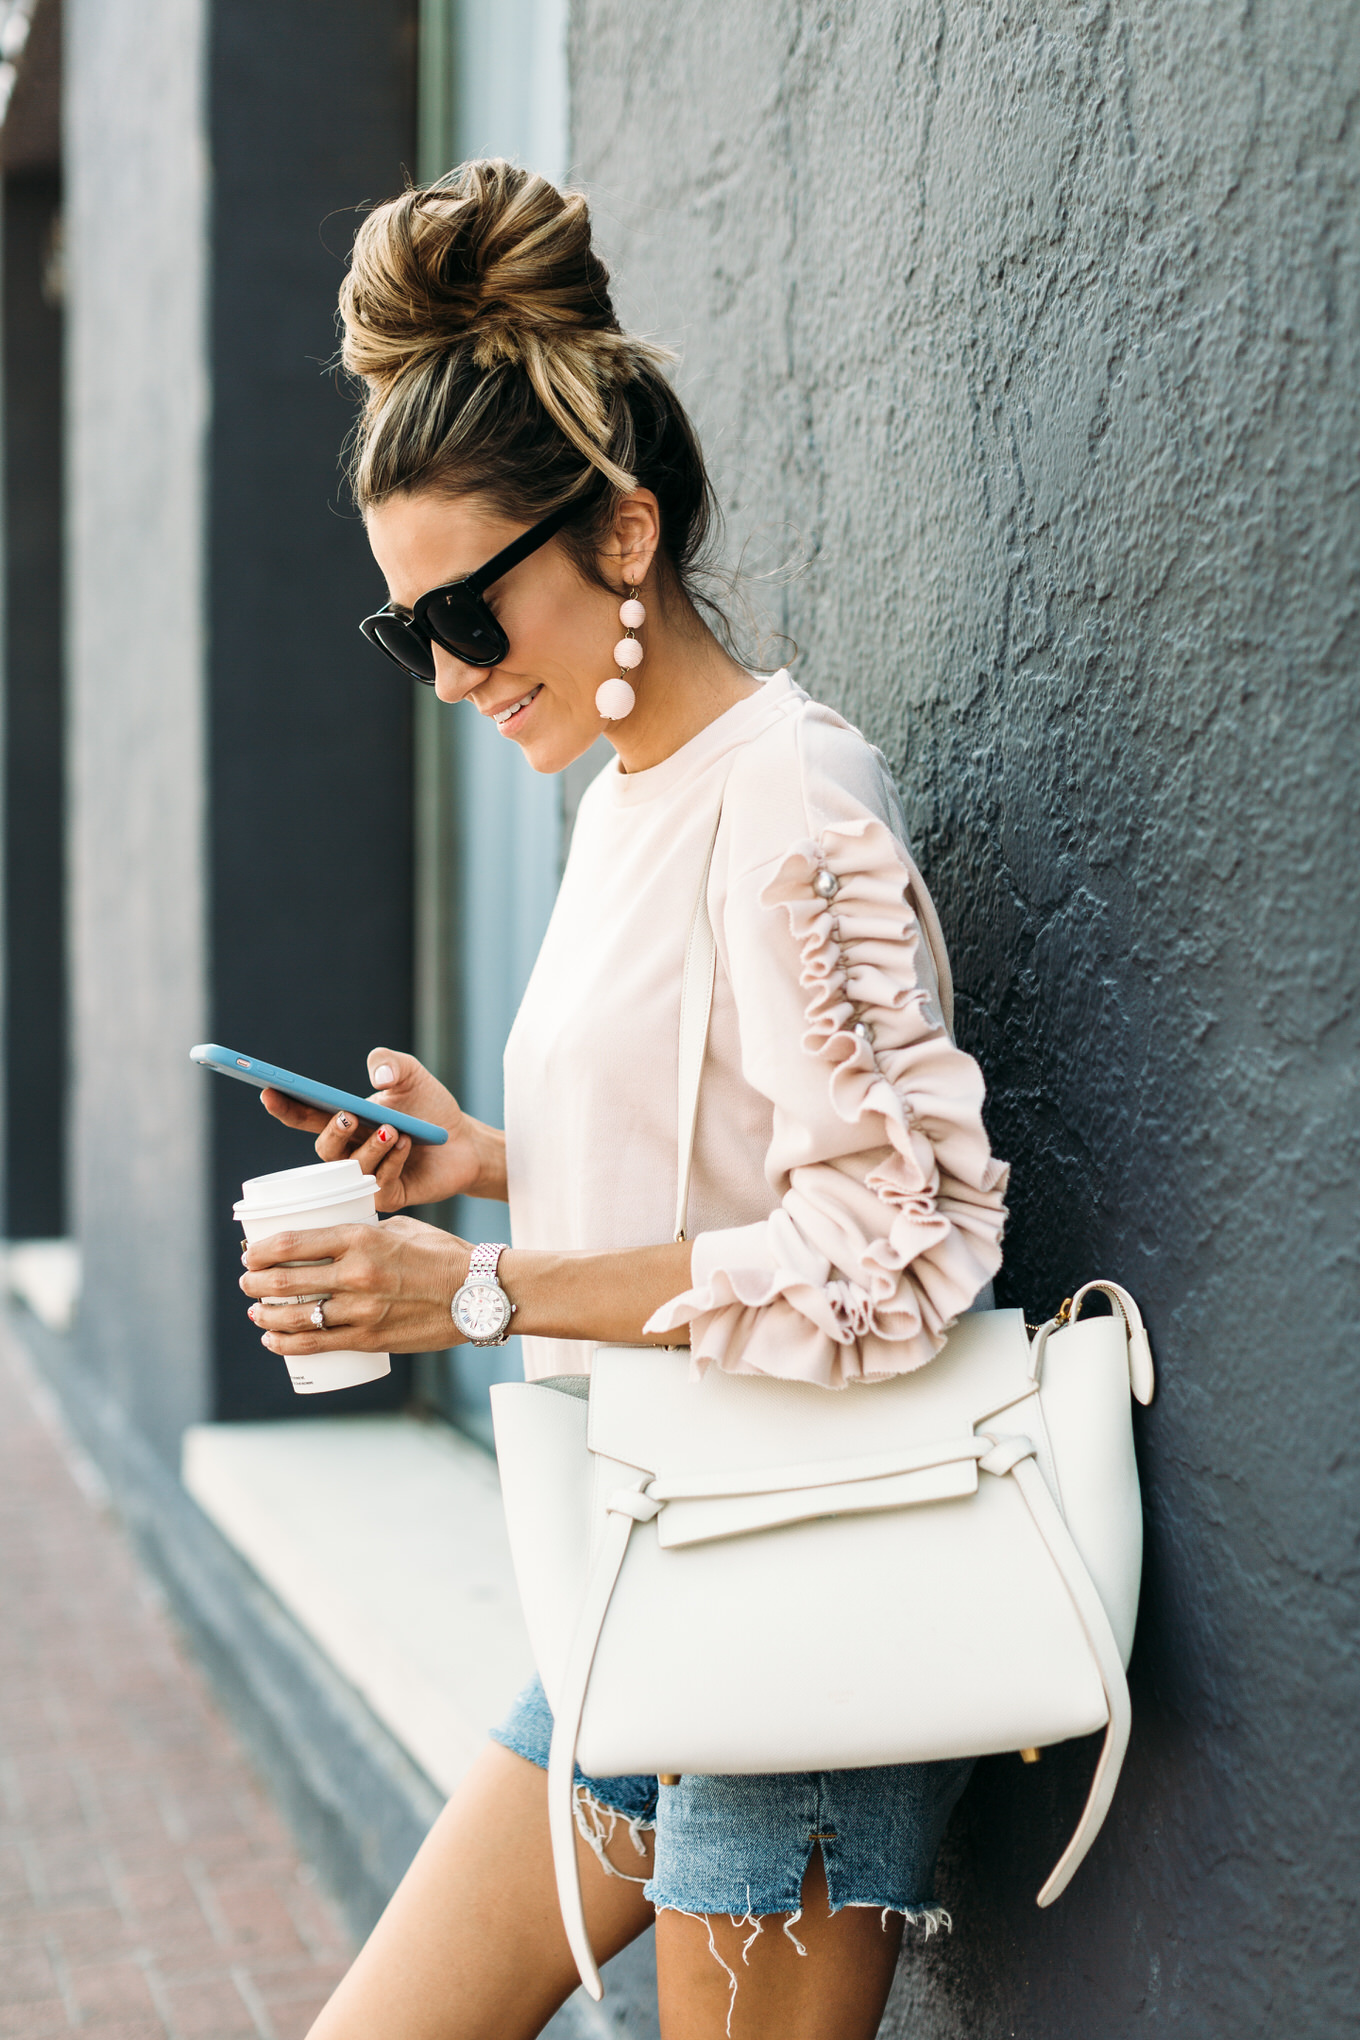 pale pink outfit